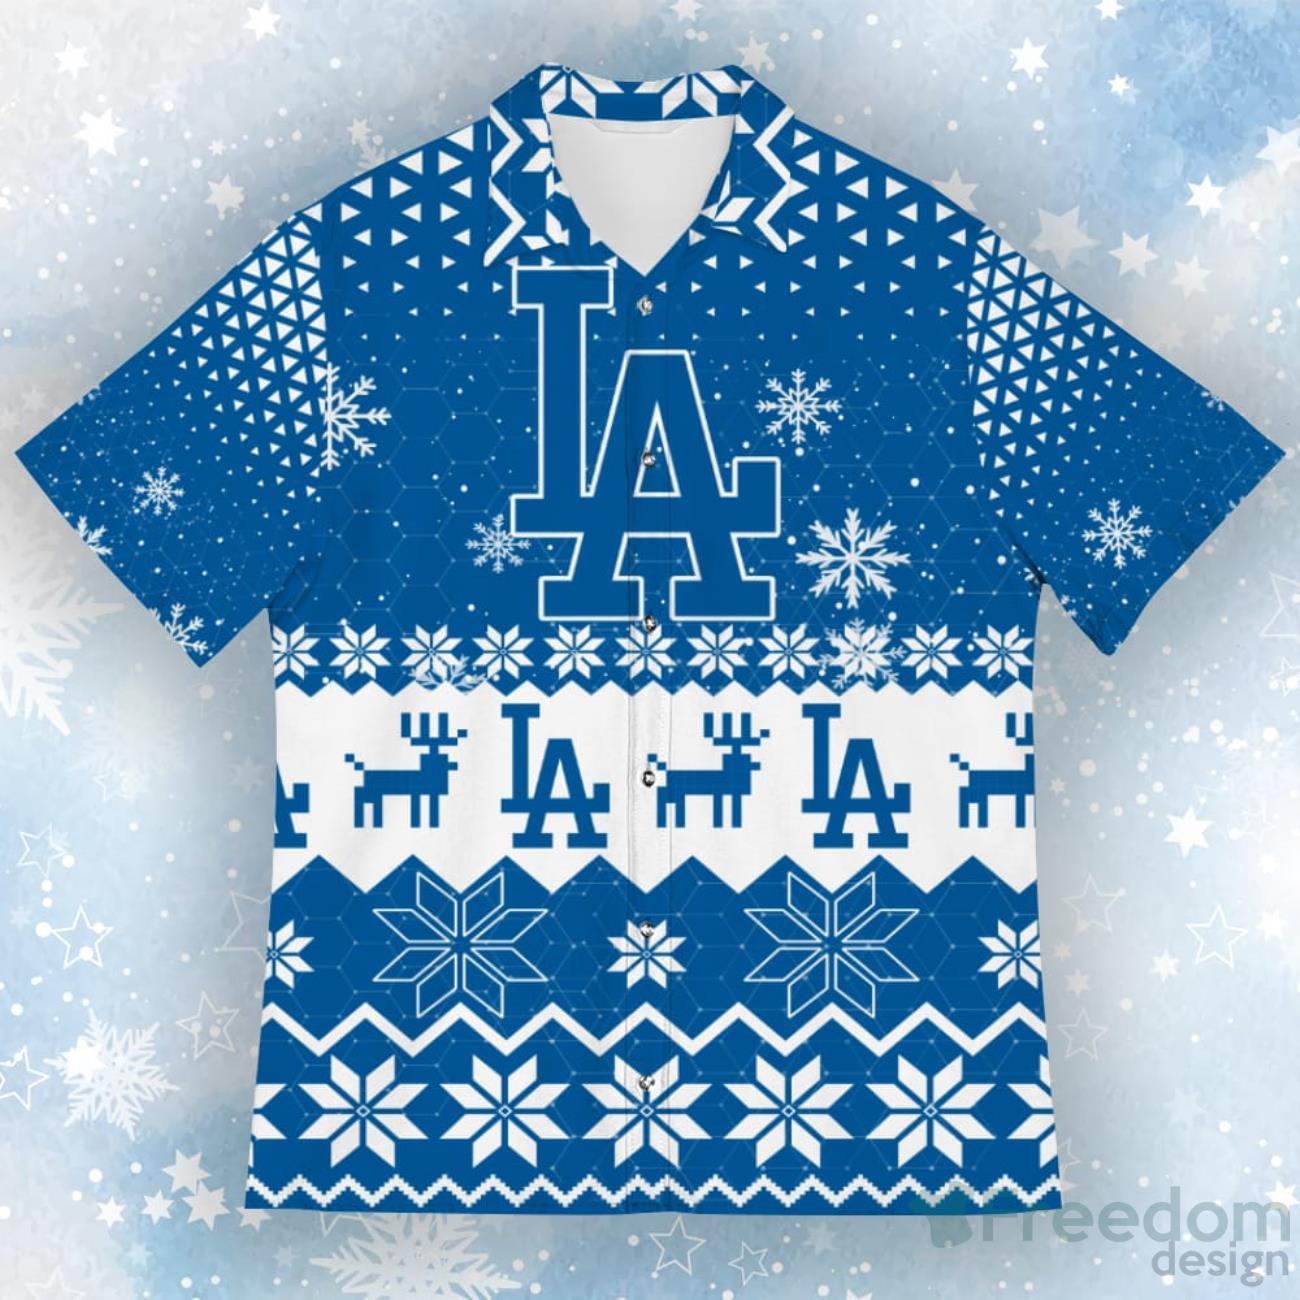 Snoopy Charlie Brown LA Dodgers Ugly Christmas Sweater - Freedomdesign